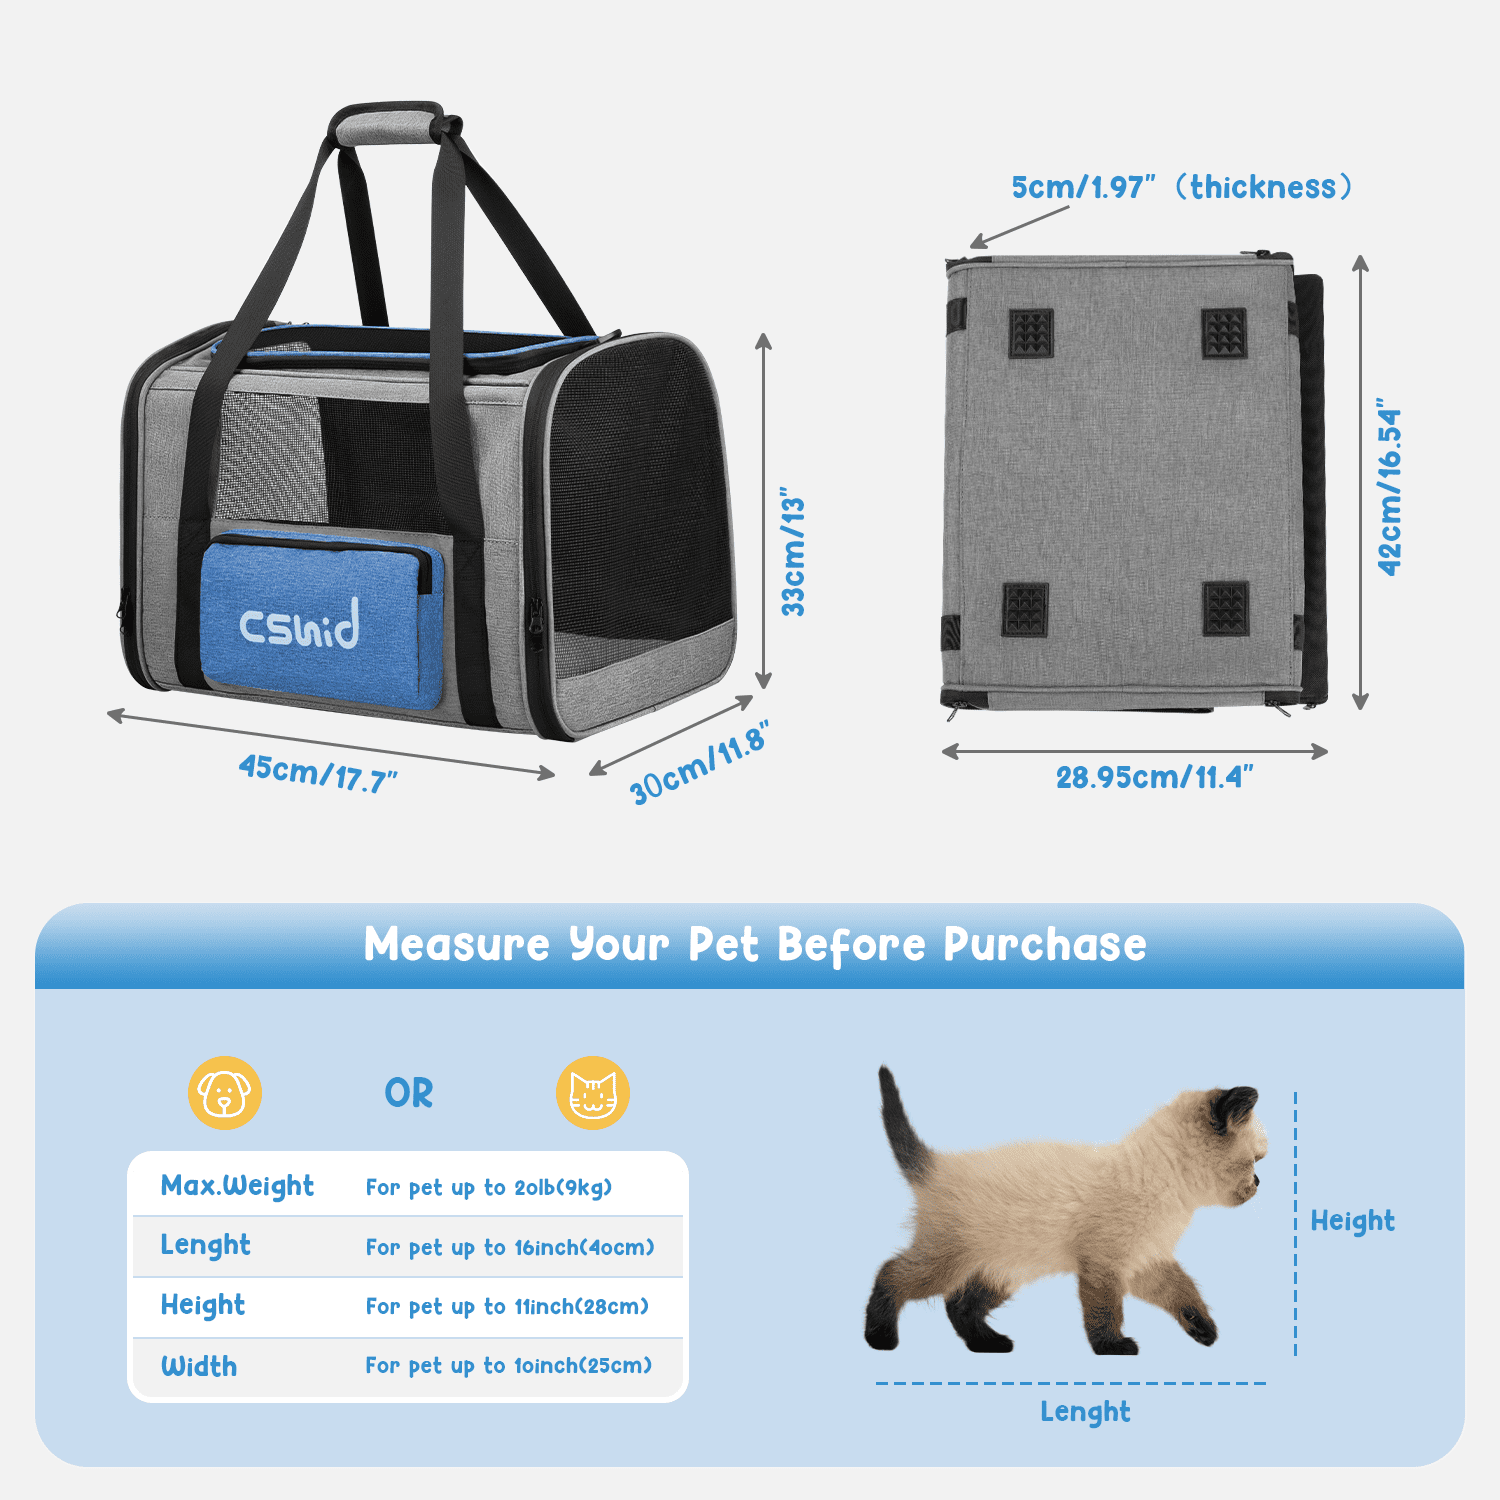 SECLATO Extra Large Pet Carrier 20 lbs+, Soft Sided Cat Carriers for Large  Cats Under 25 lbs, Folding Big Dog Carrier 20x13x13, Cat Carrier for 2